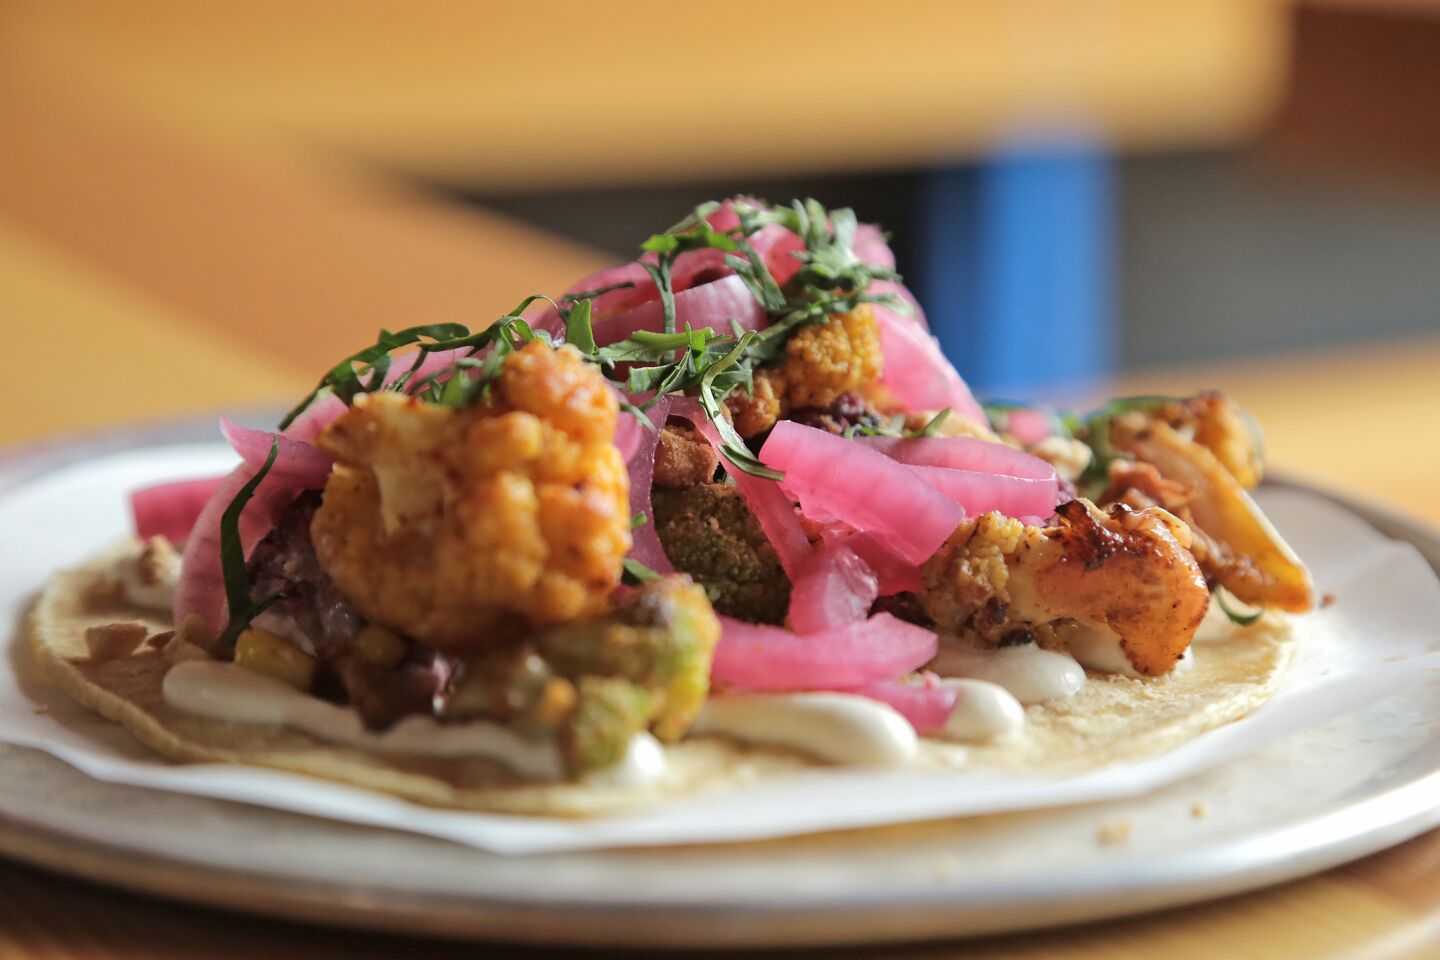 The rainbow cauliflower taco with grilled corn and cashew puree is a vegan-friendly menu item at Trejo's Cantina in Hollywood.